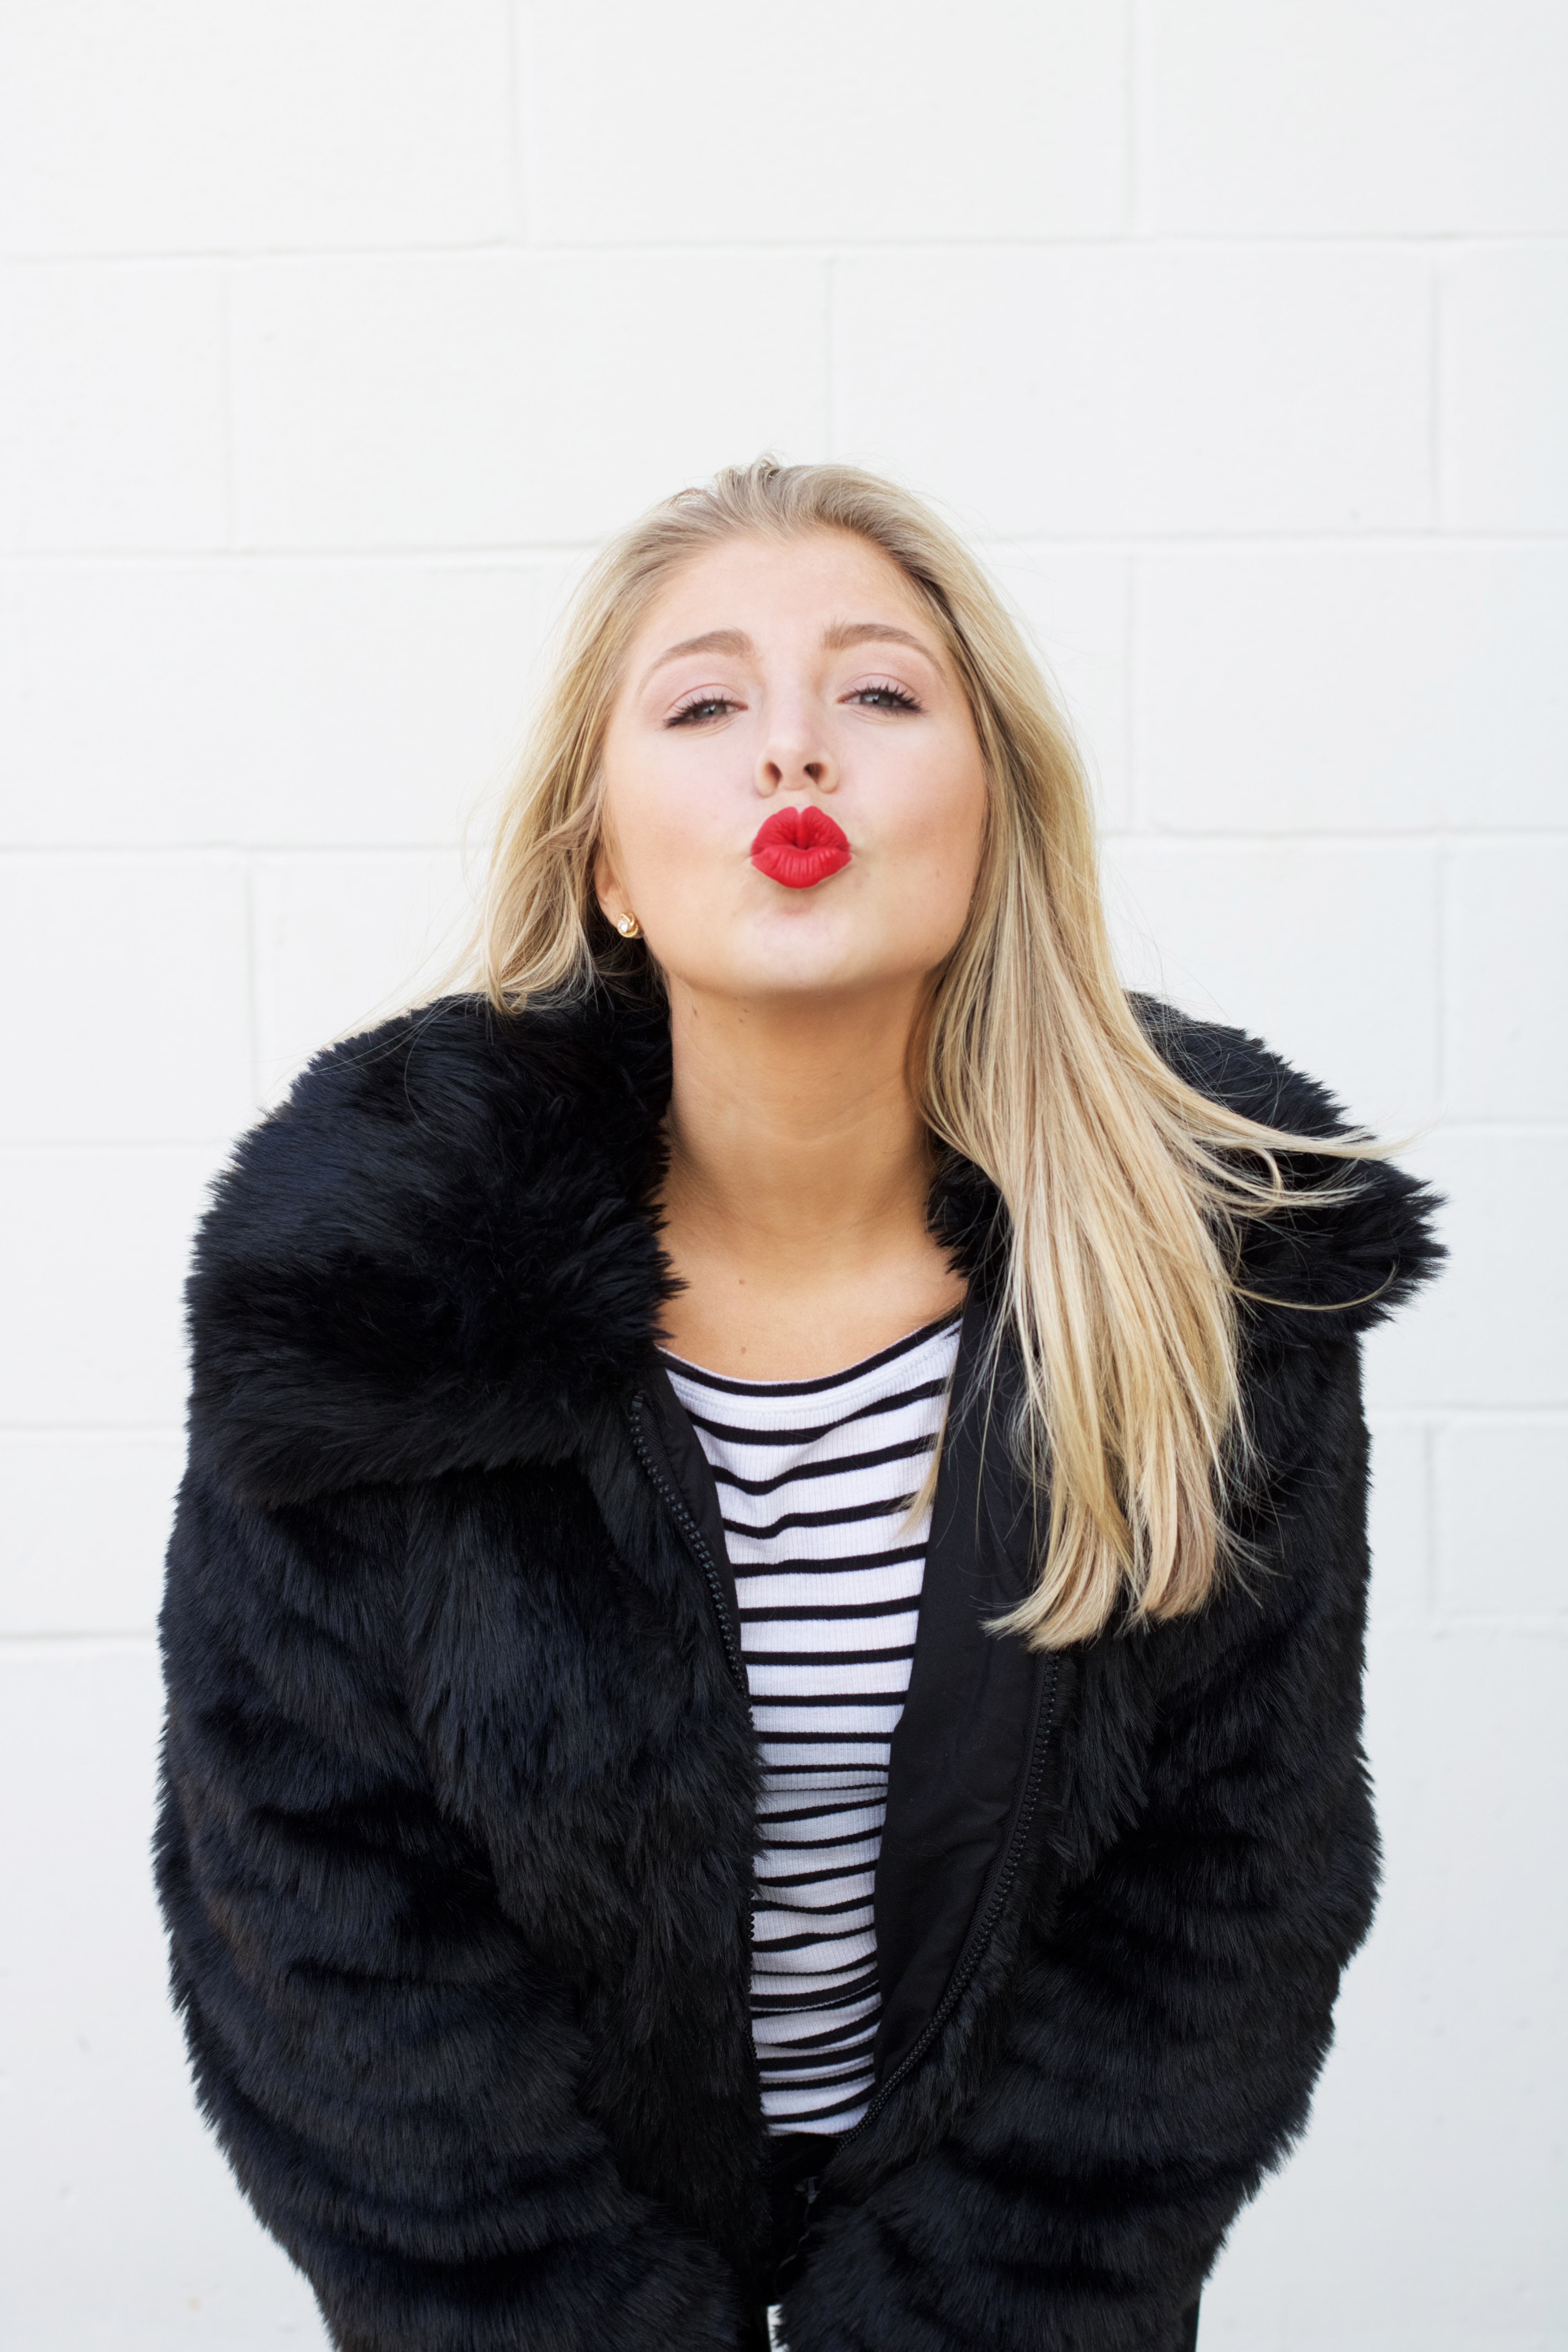 How to get perfect red lips